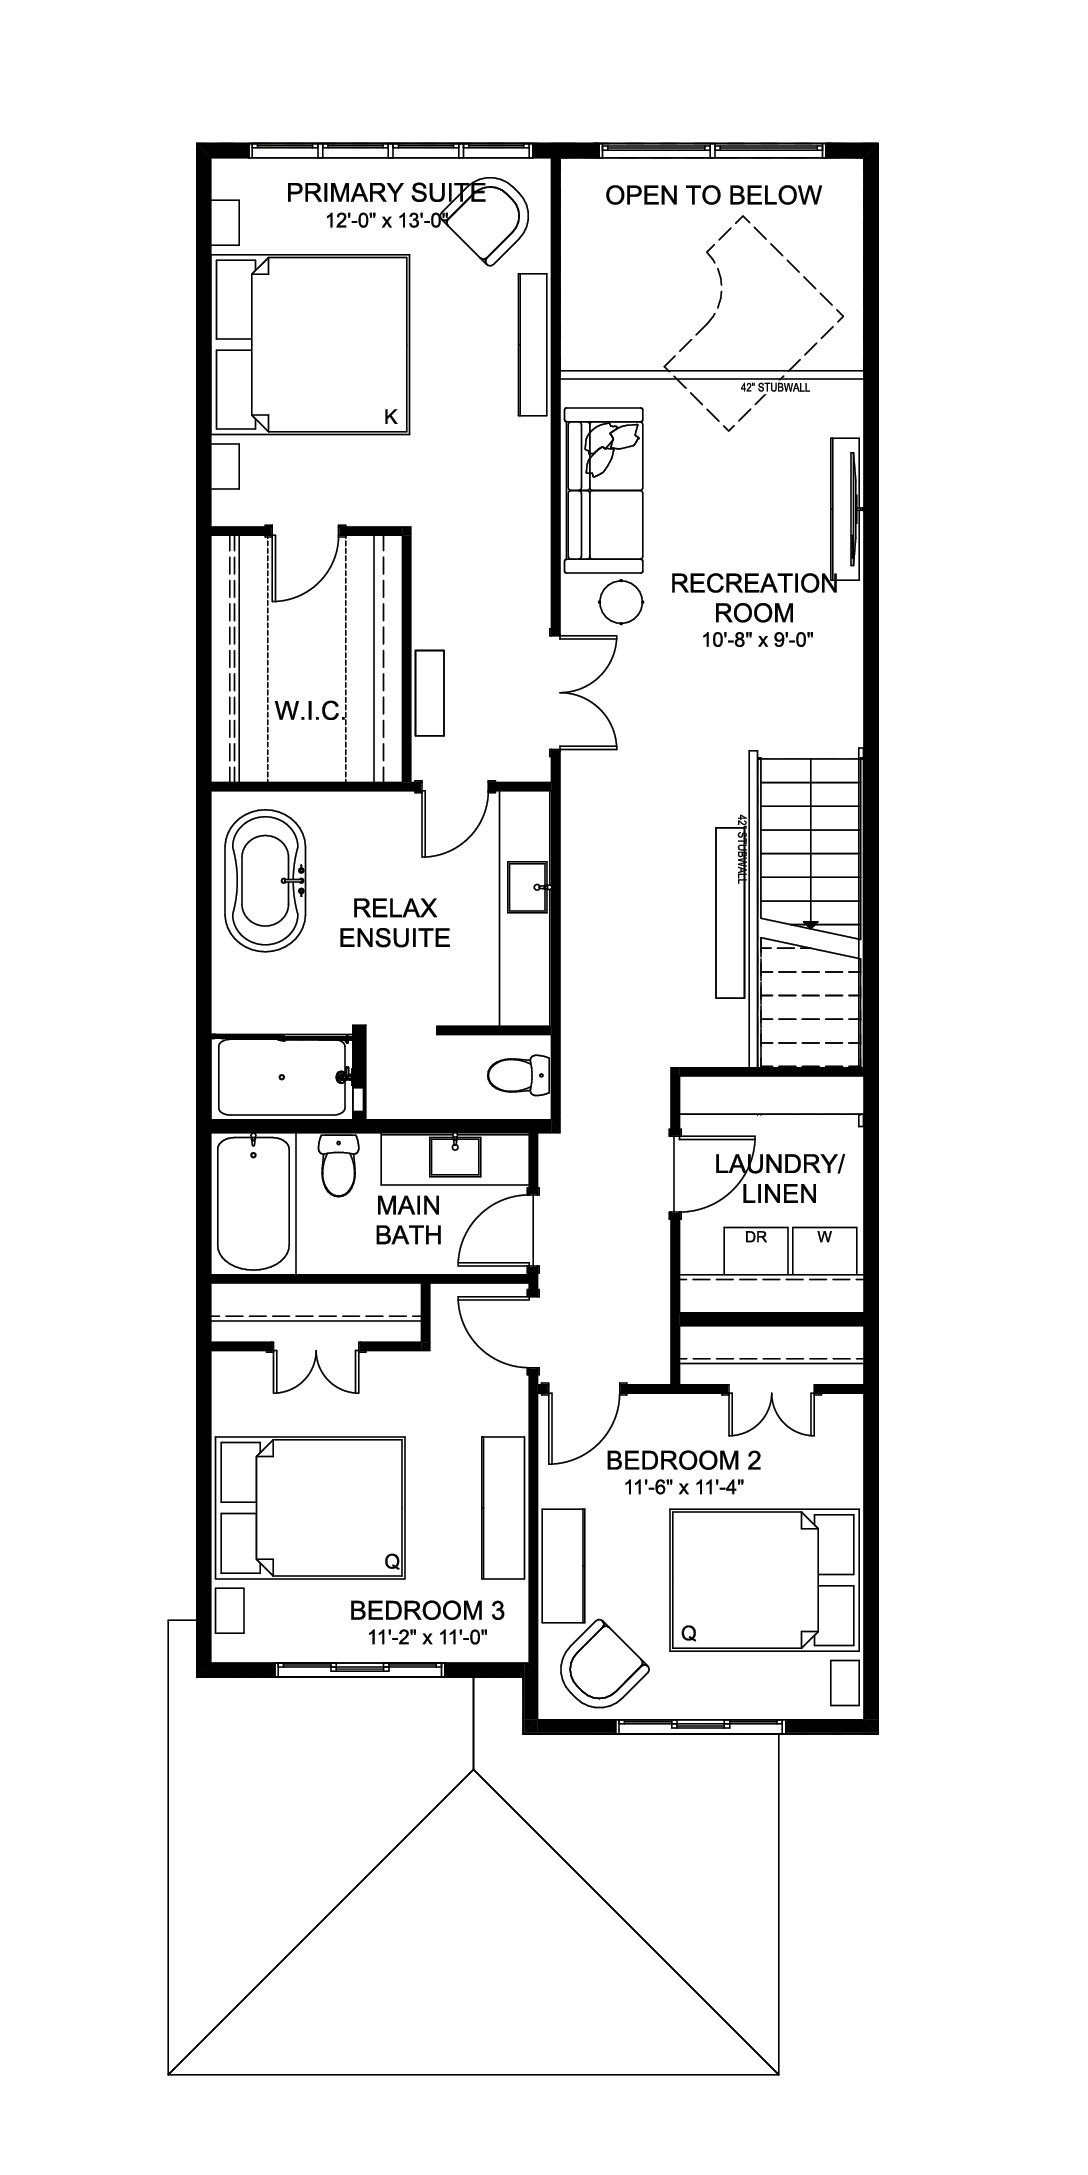  Entertain Play 24  Floor Plan of Woodhaven Edgemont with undefined beds